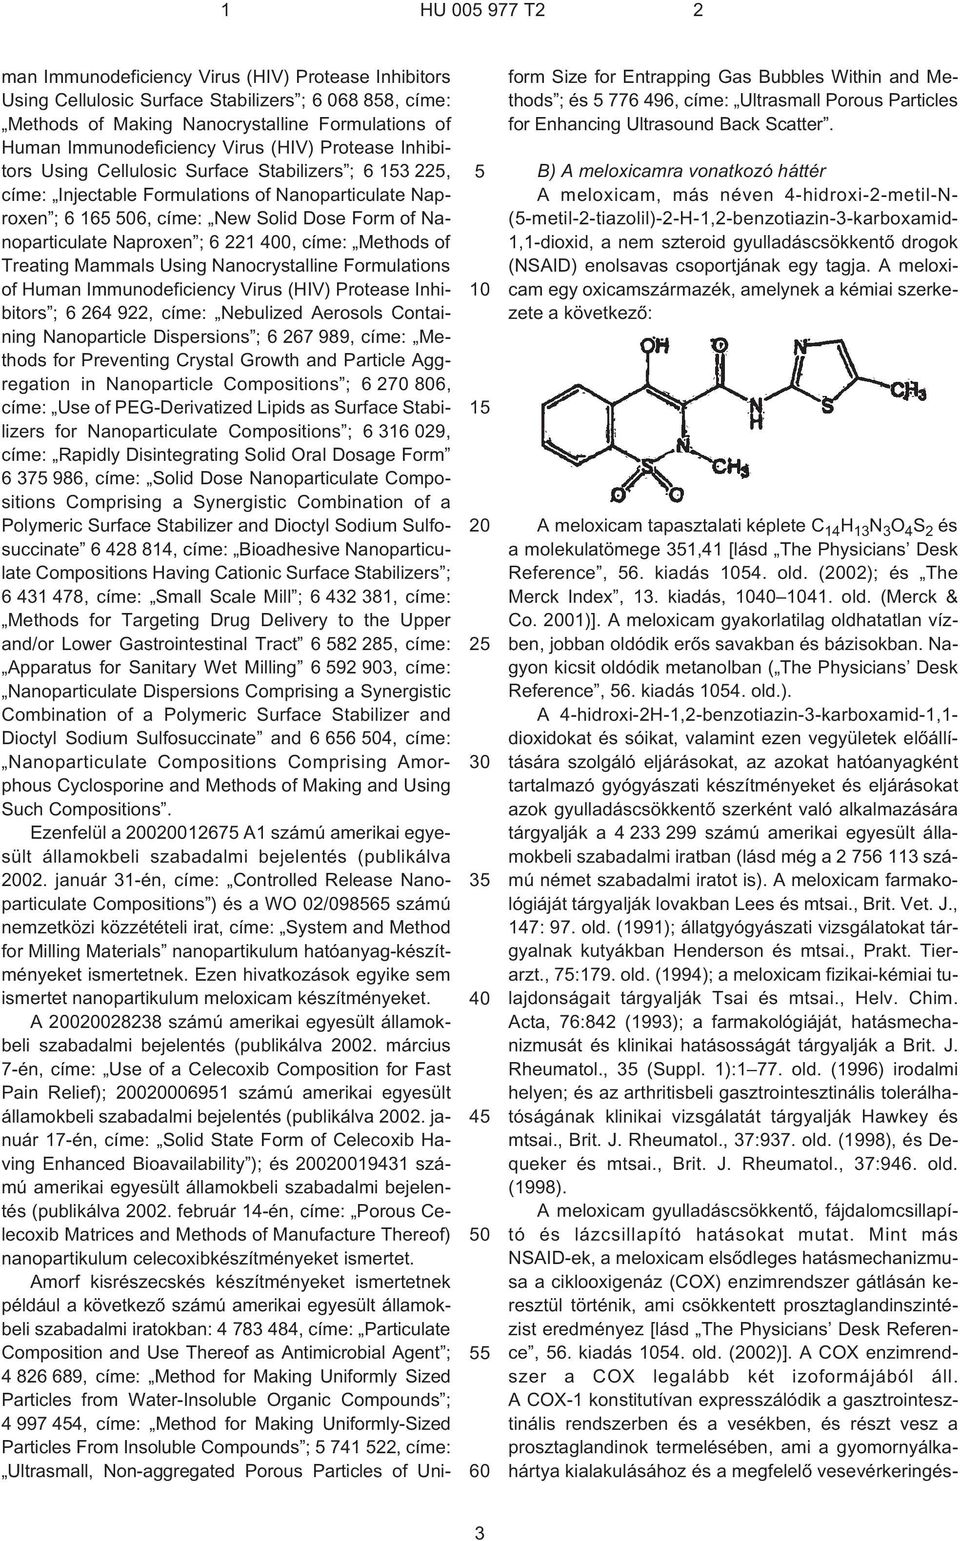 Nanoparticulate Naproxen ; 6 221 0, címe: Methods of Treating Mammals Using Nanocrystalline Formulations of Human Immunodeficiency Virus (HIV) Protease Inhibitors ; 6 264 922, címe: Nebulized